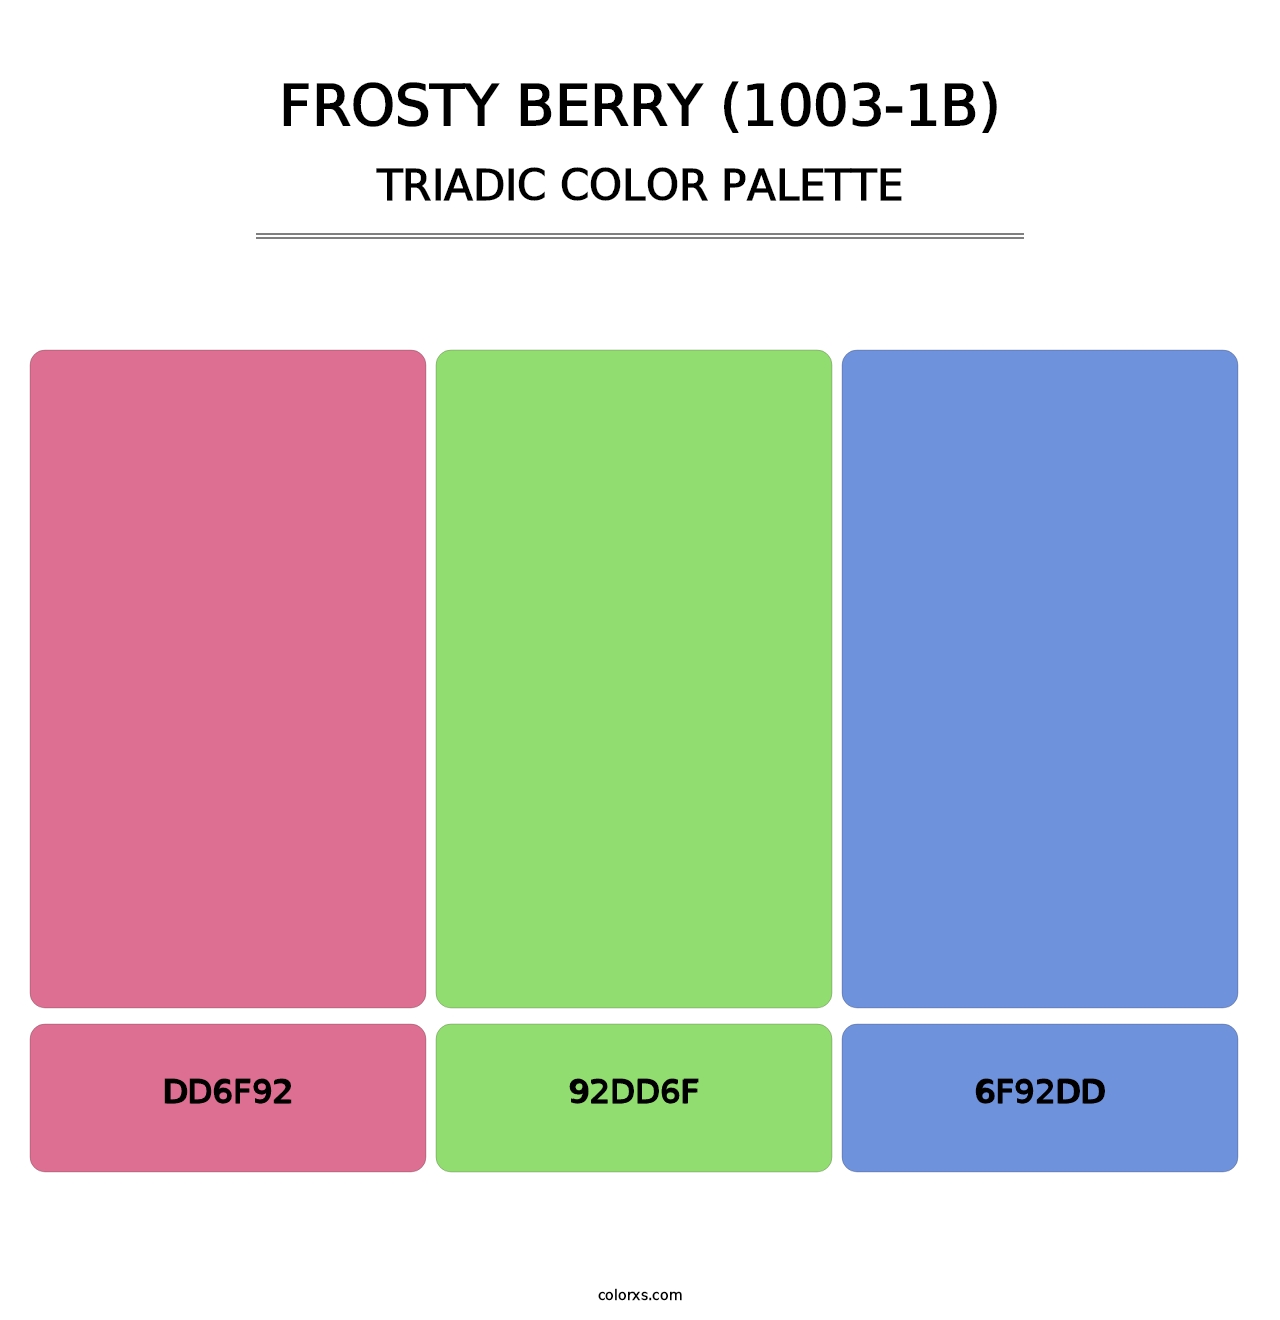 Frosty Berry (1003-1B) - Triadic Color Palette